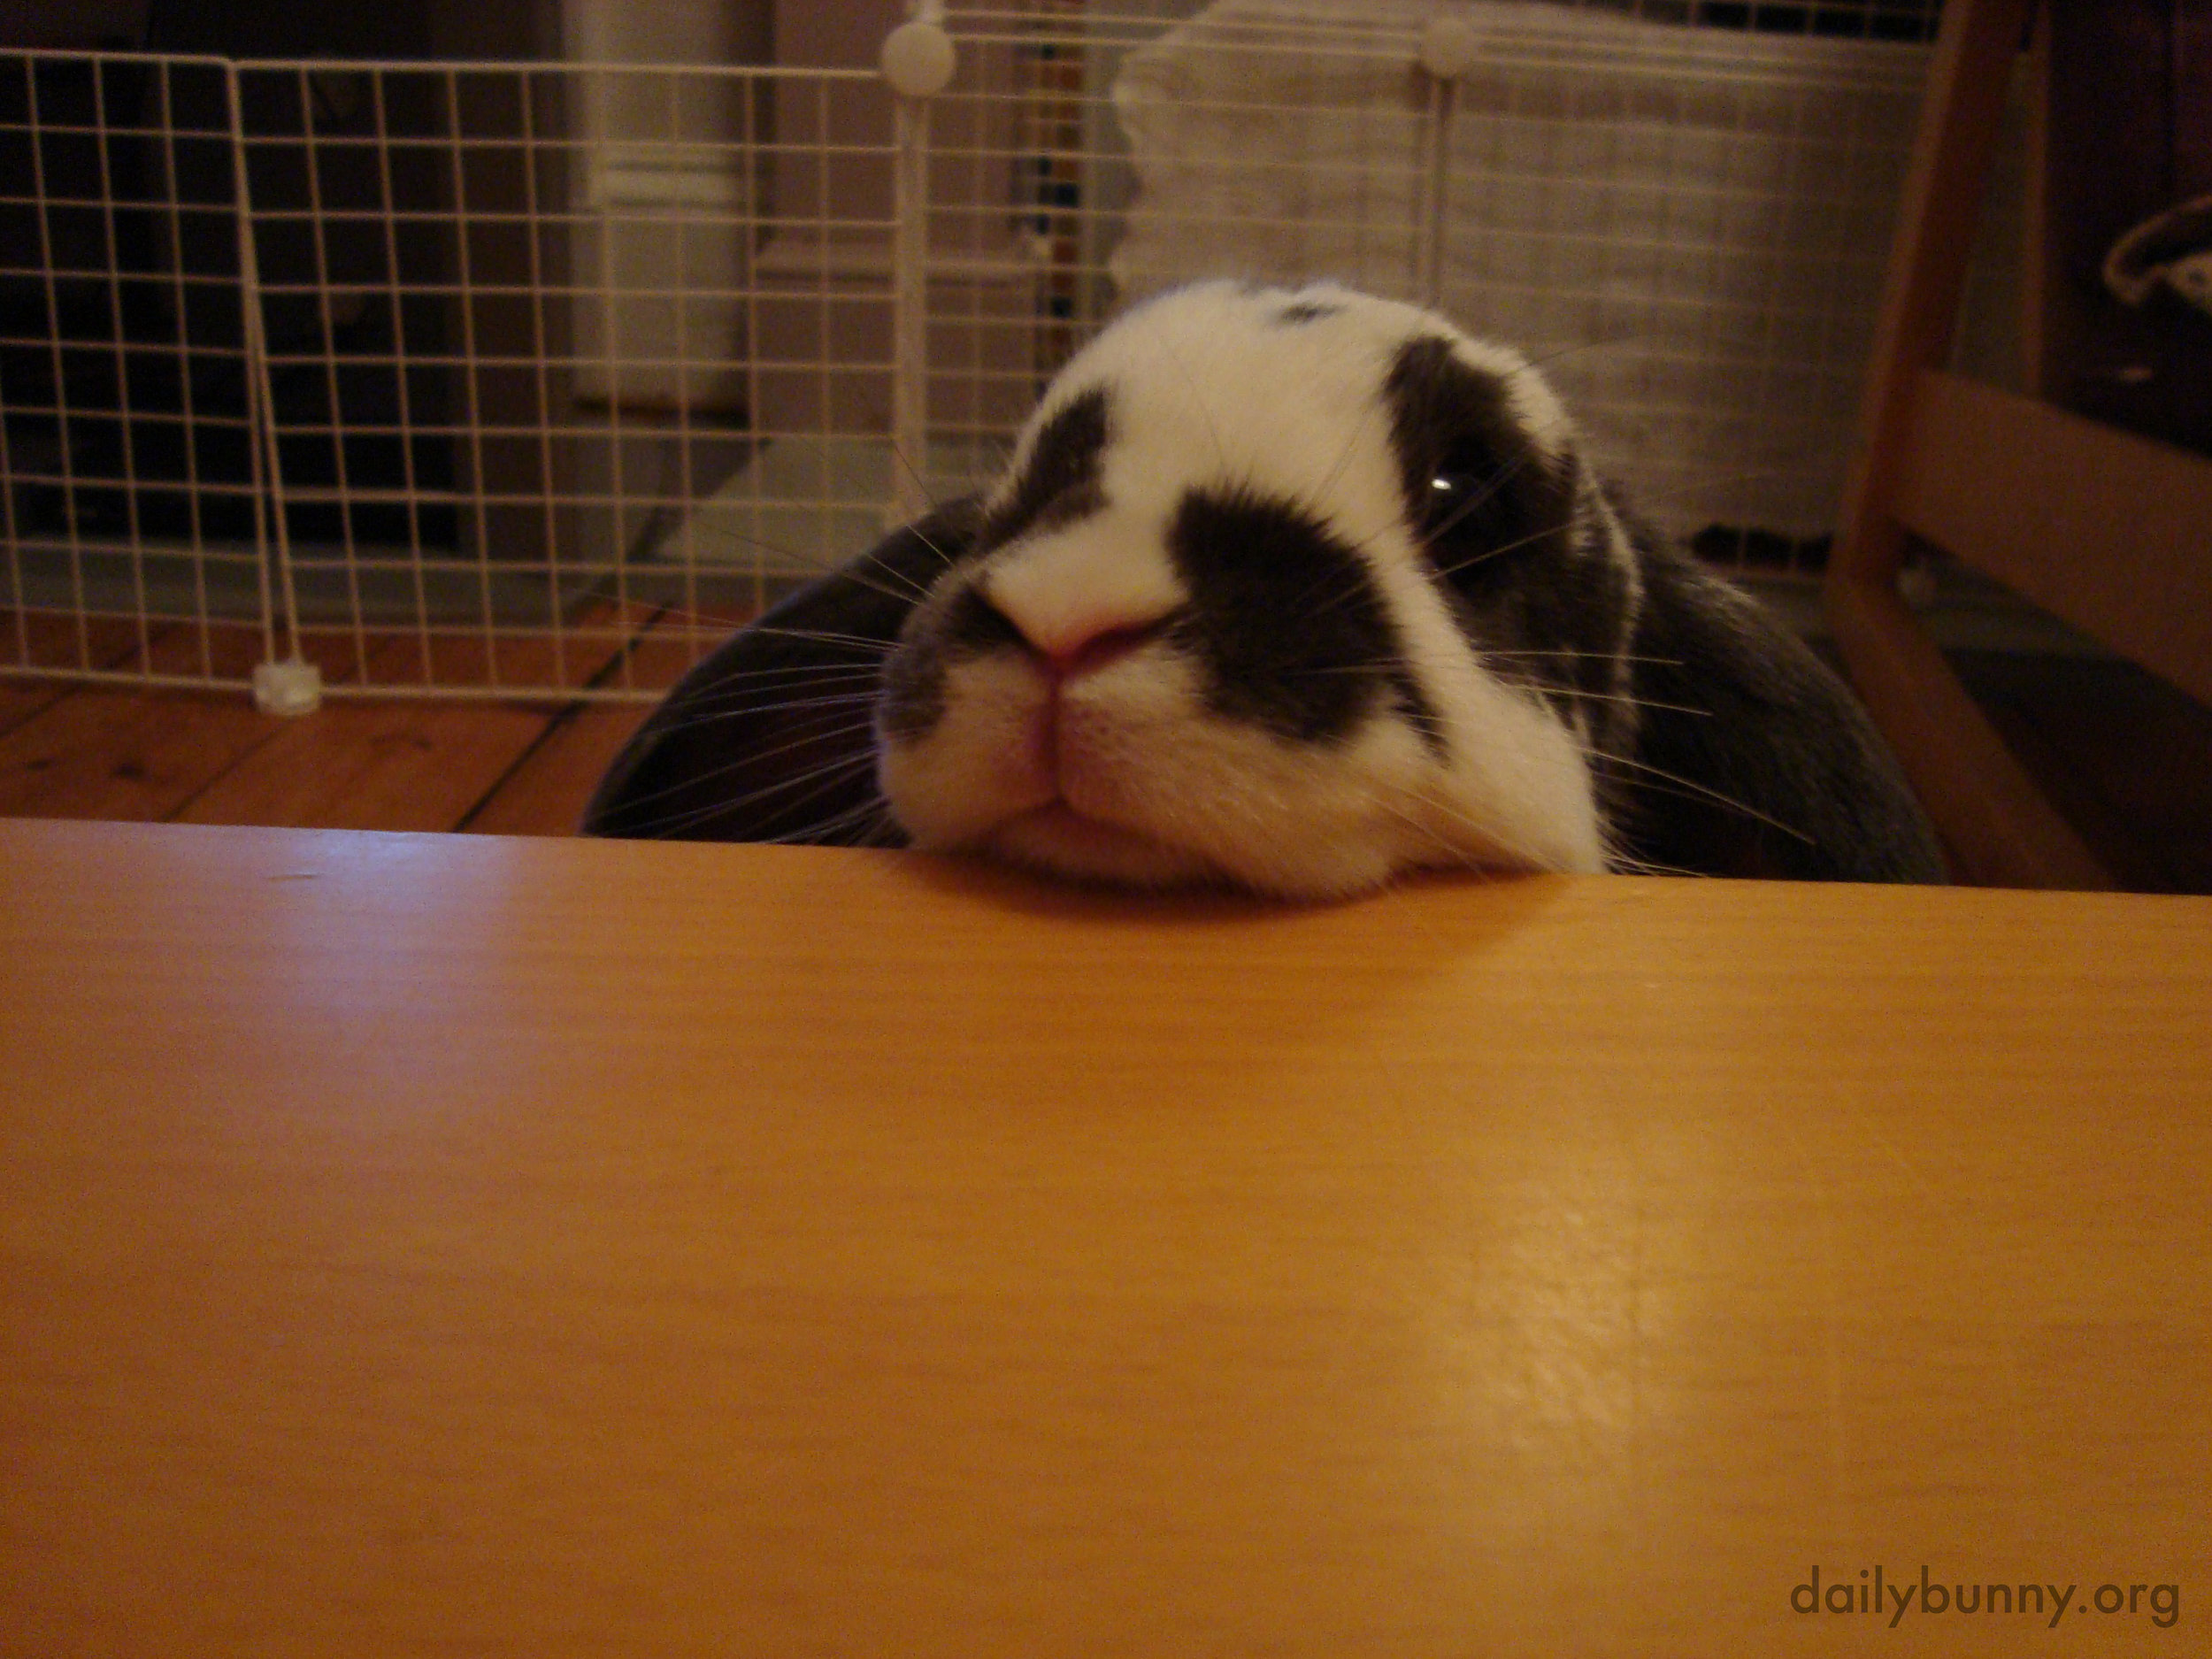 Bunny Checks to See If Her Human Has Put Down the Salad Yet 1